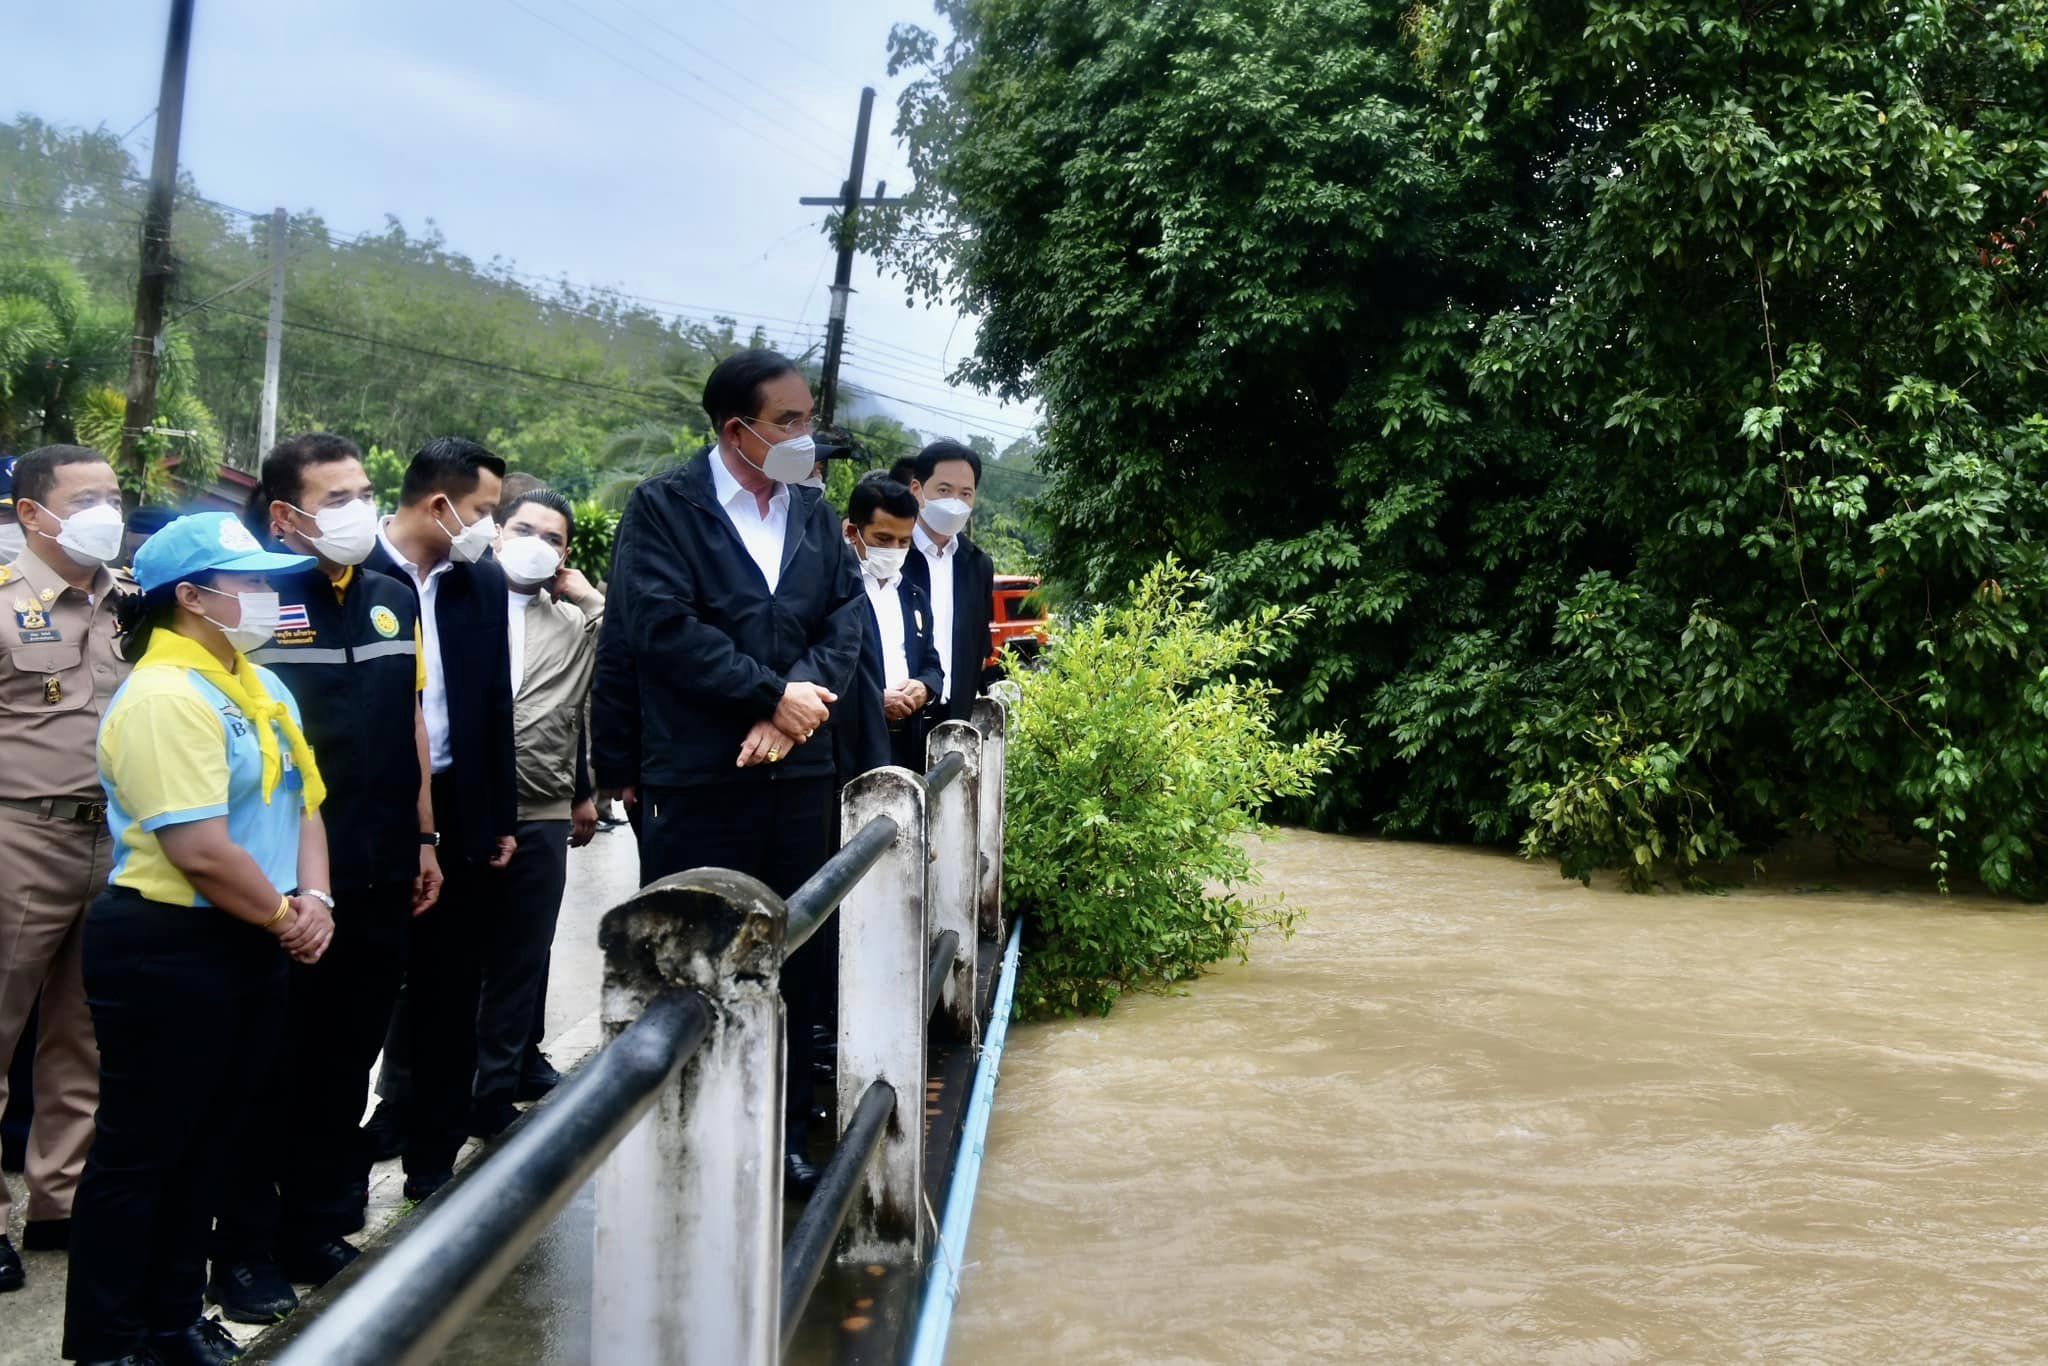 Prime Minister Prayut Chan-o-cha went to the southern province of Songkhla to inspect water management and visit flood victims